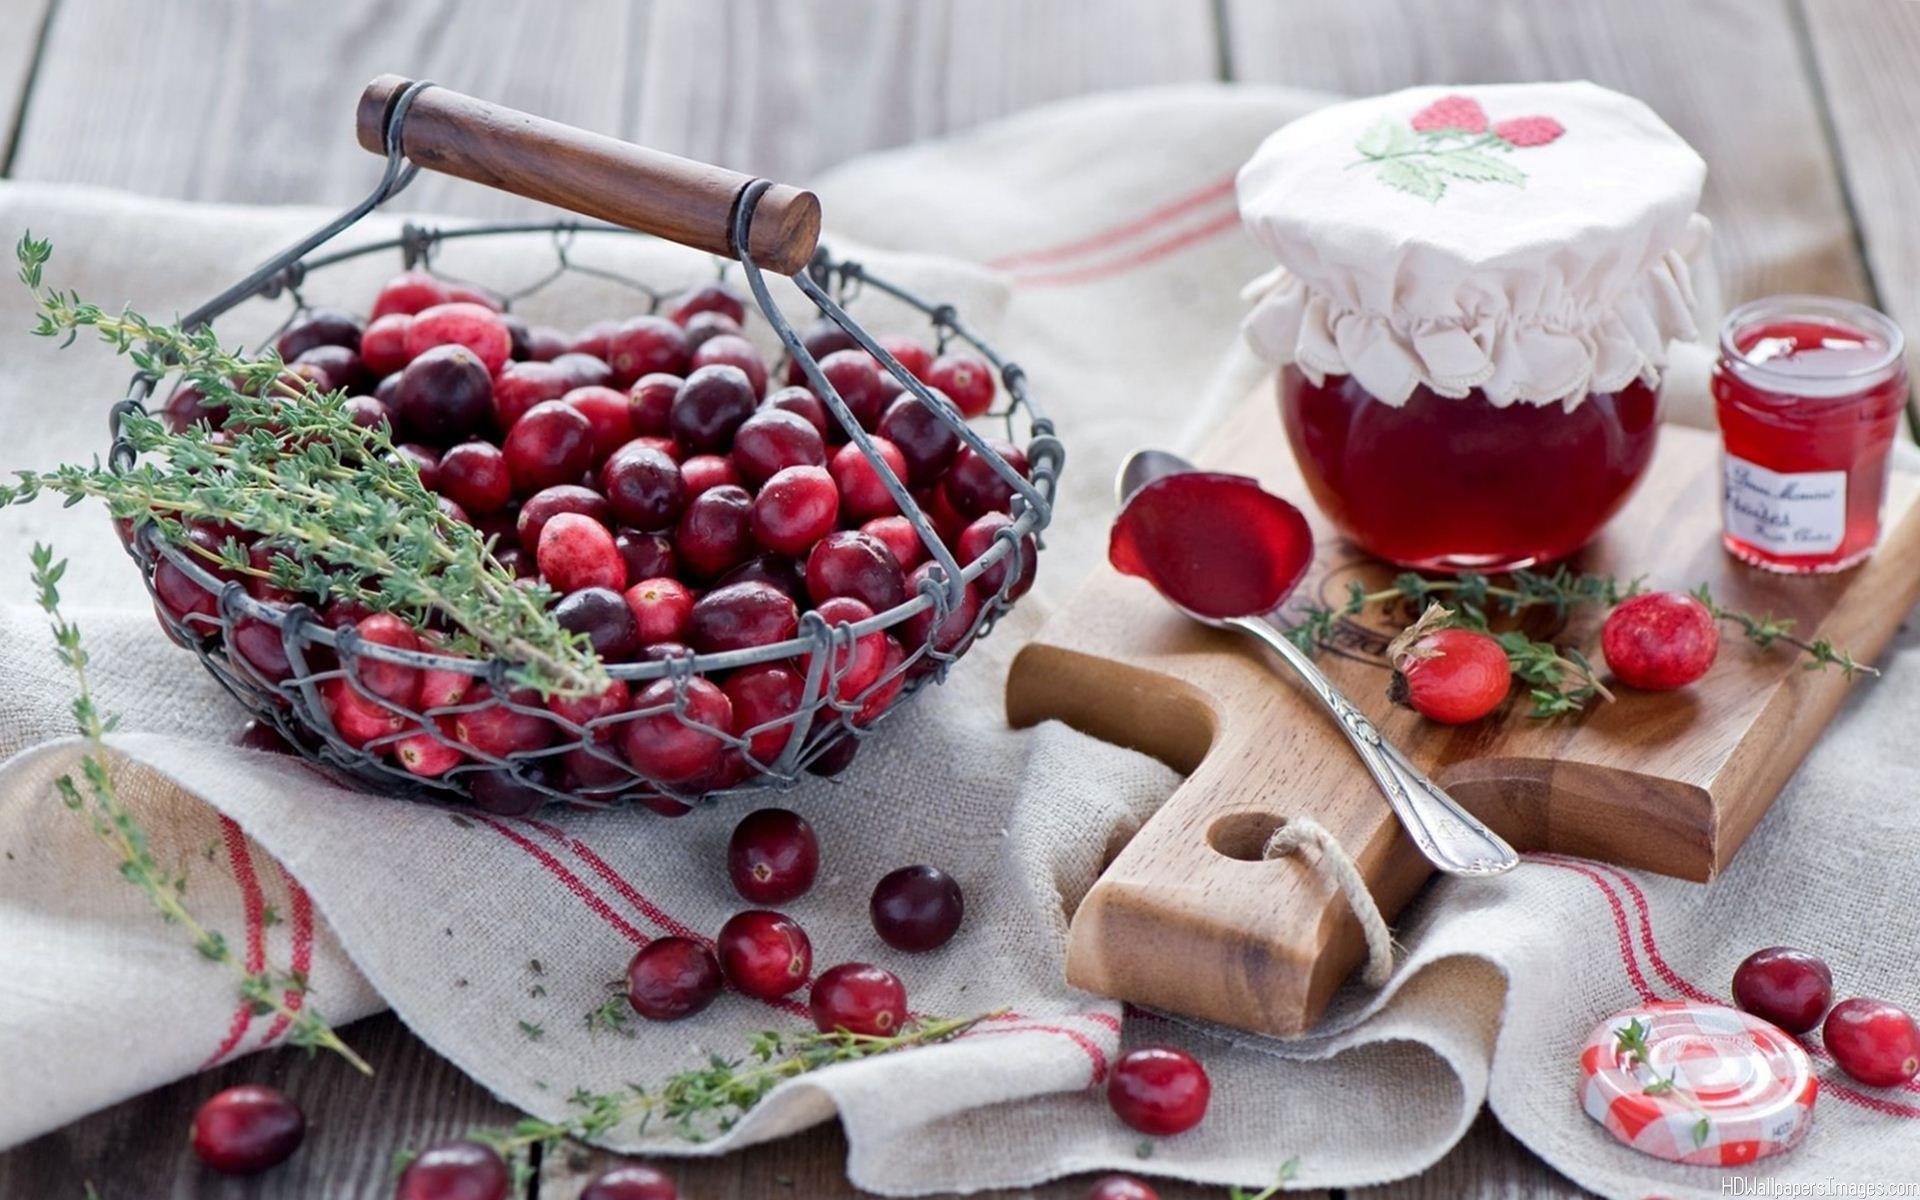 Red Cranberries In Plate Image. HD Wallpaper Image